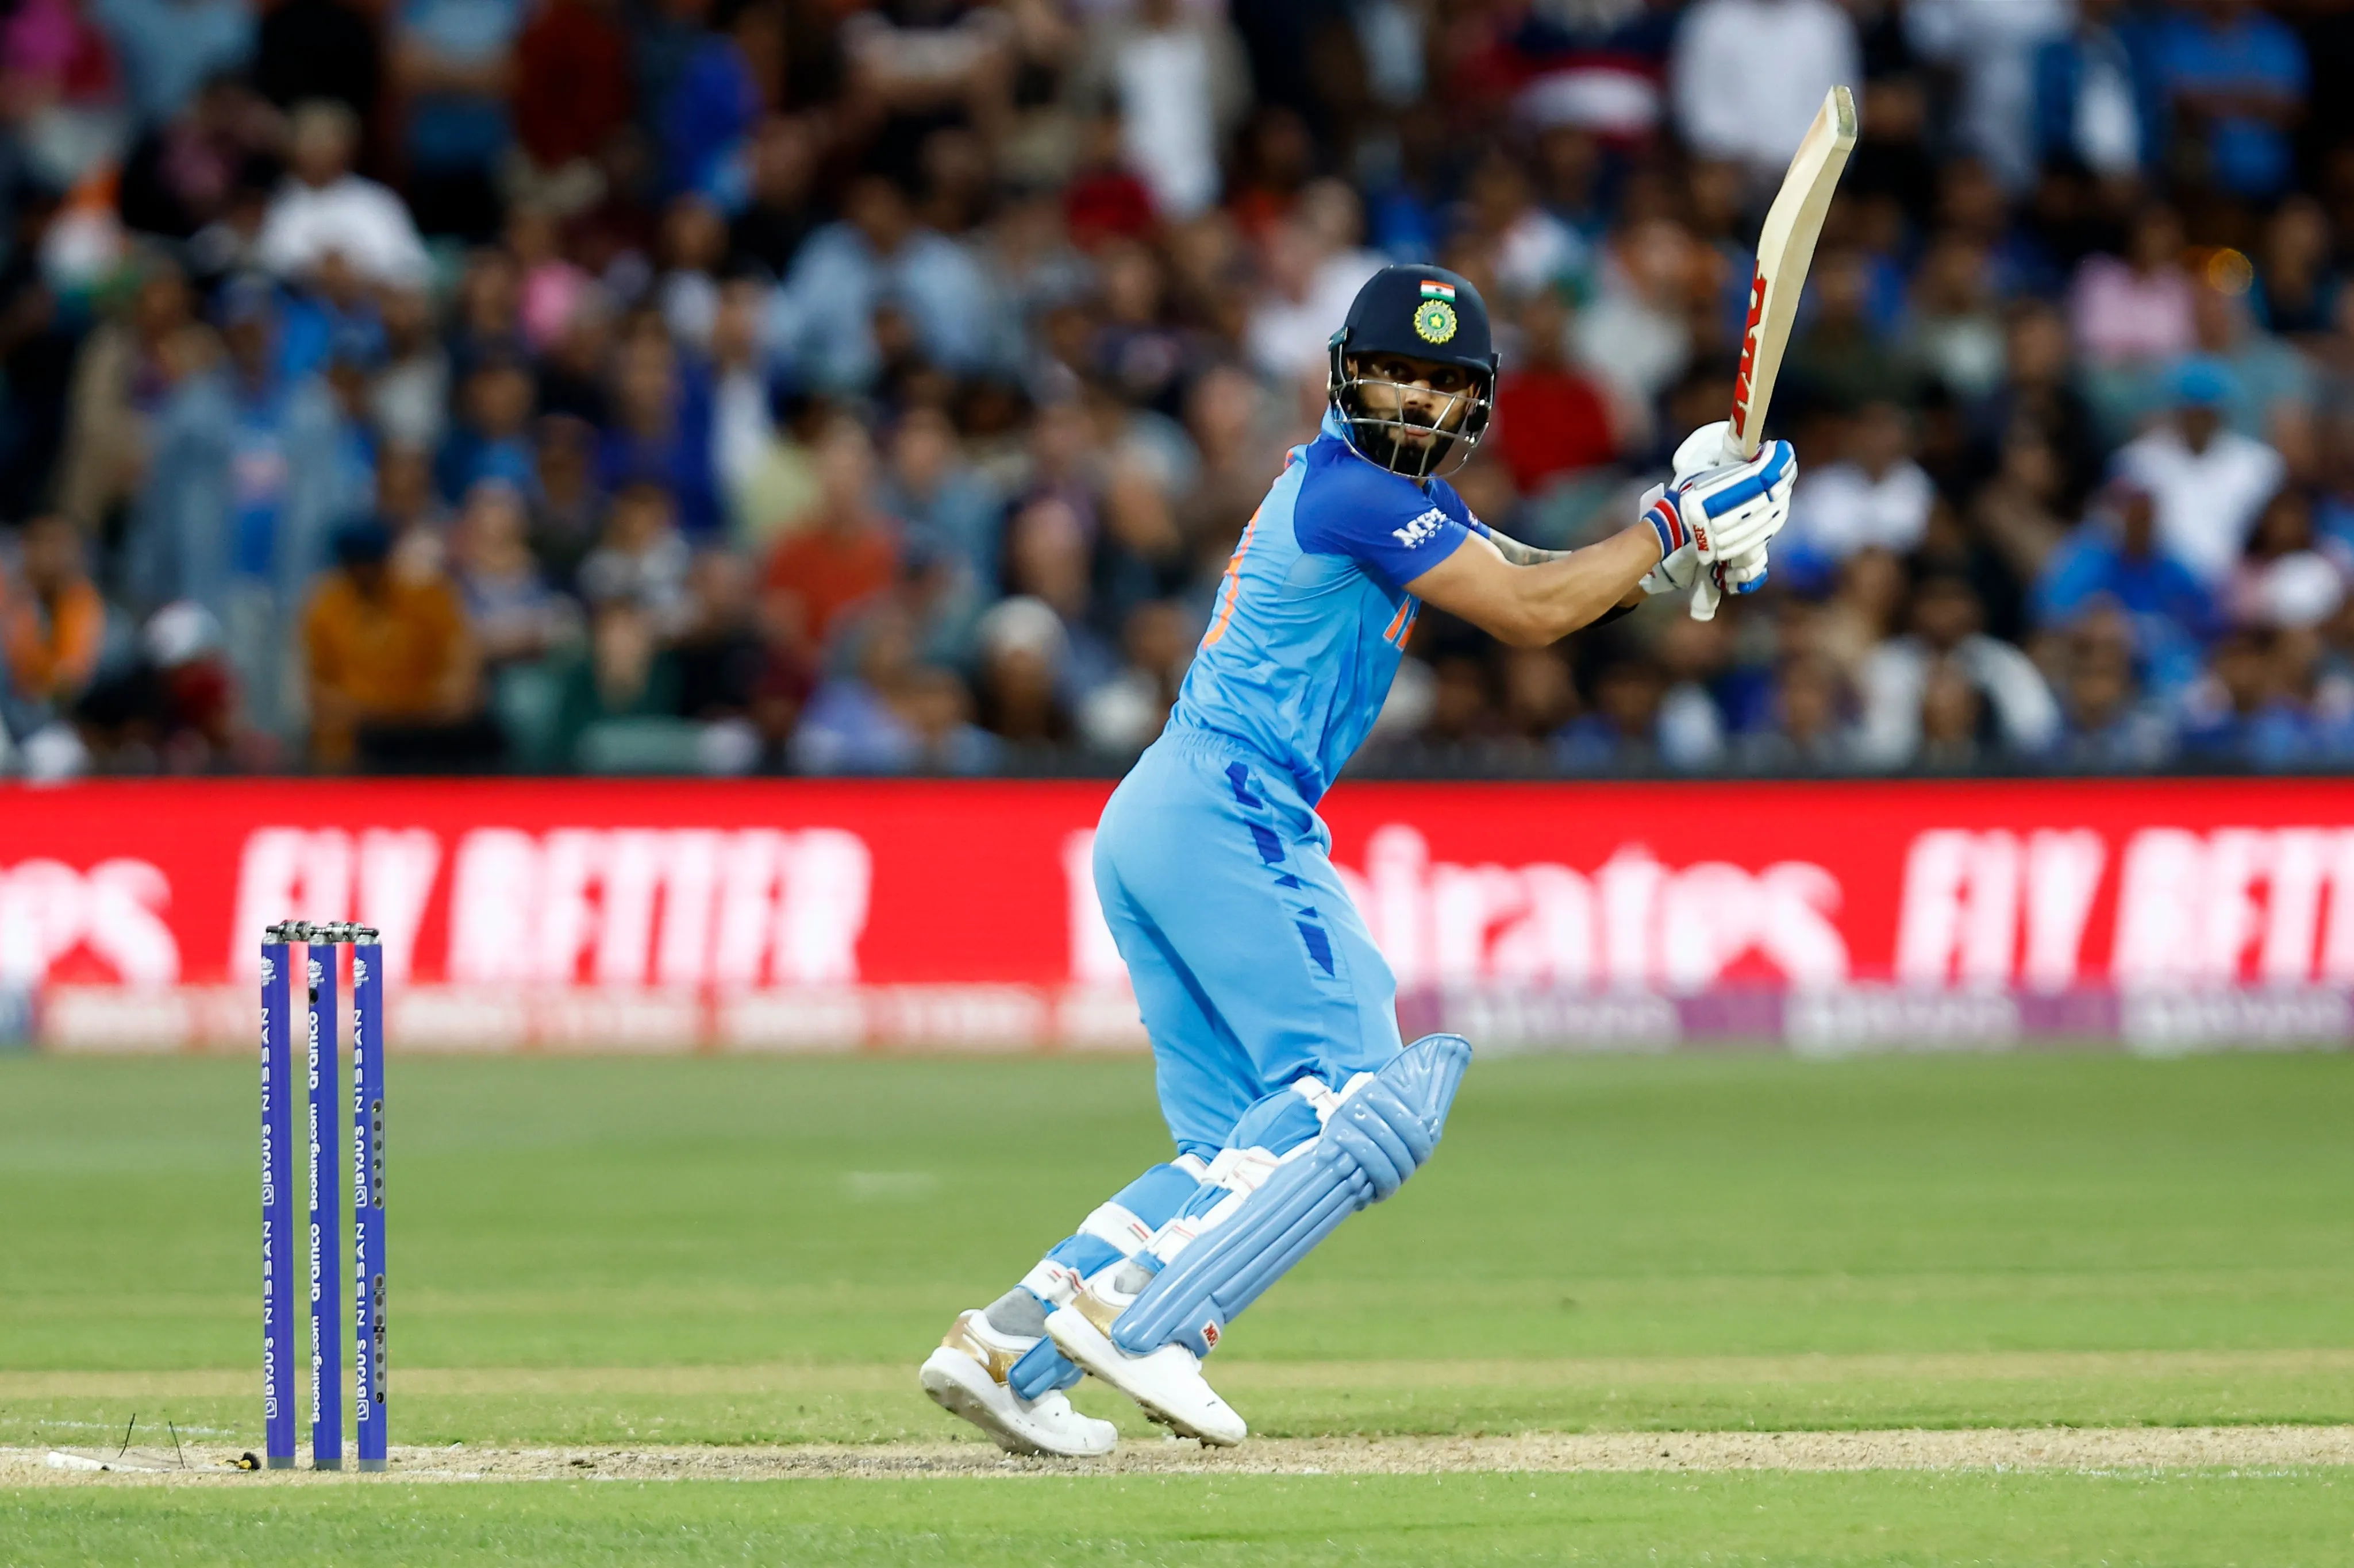 ICC World T20 | Twitter reacts to Virat Kohli turning into ‘Nostradamus’ with unnervingly confident ball tracking prediction